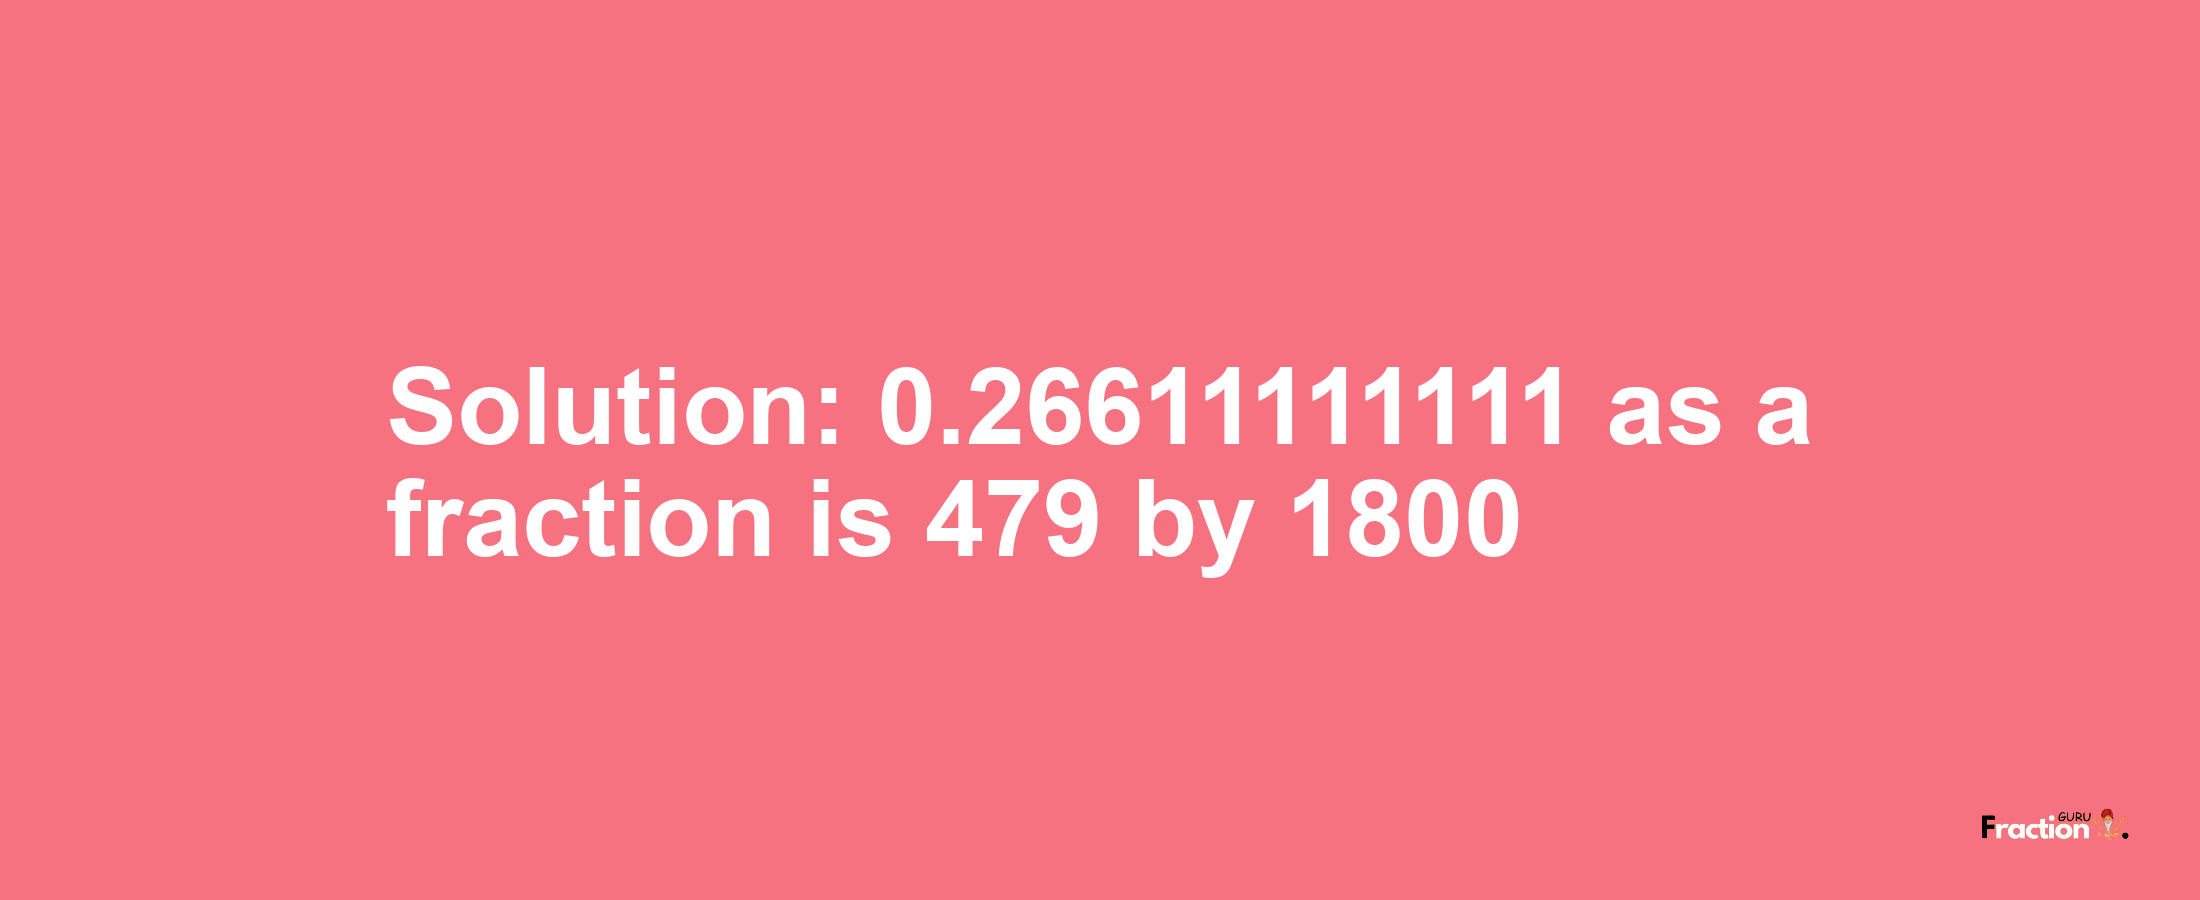 Solution:0.26611111111 as a fraction is 479/1800